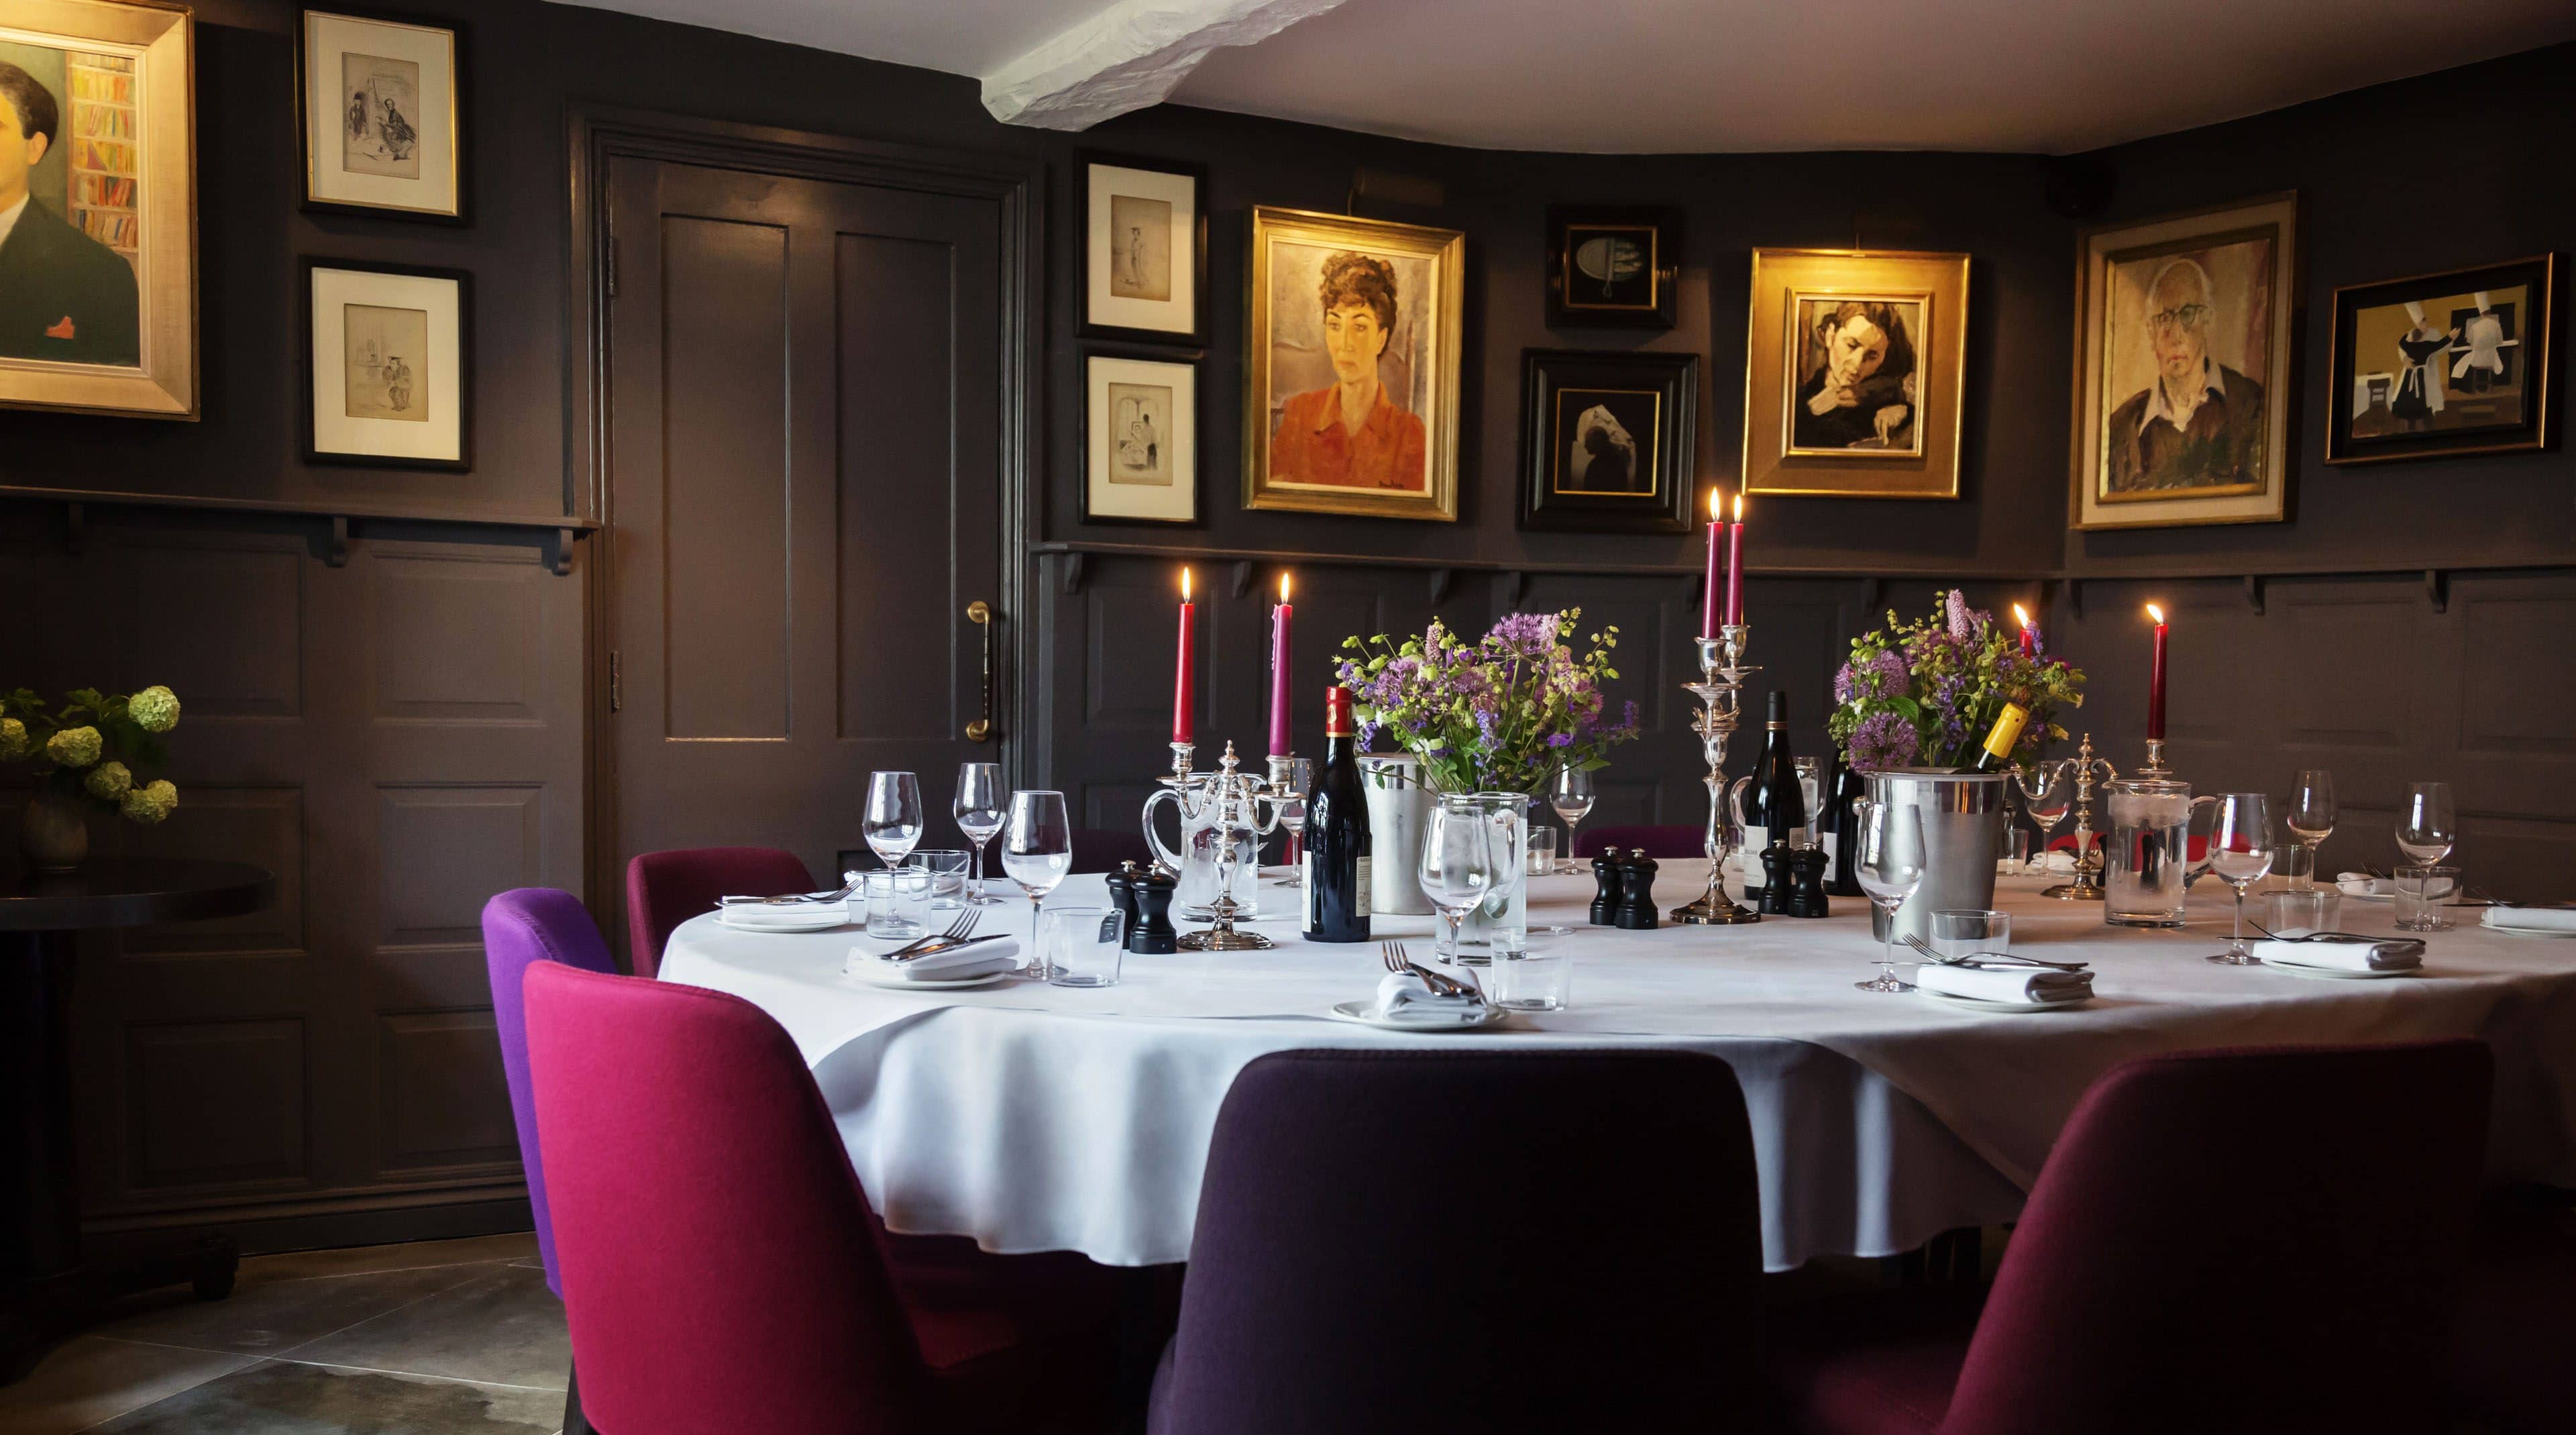 0043-2014-Parsonage-Grill-Oxford-Low-Res-Pike-Room-Private-Dining-Celebration-Web-Hero-aspect-ratio-3840-2139